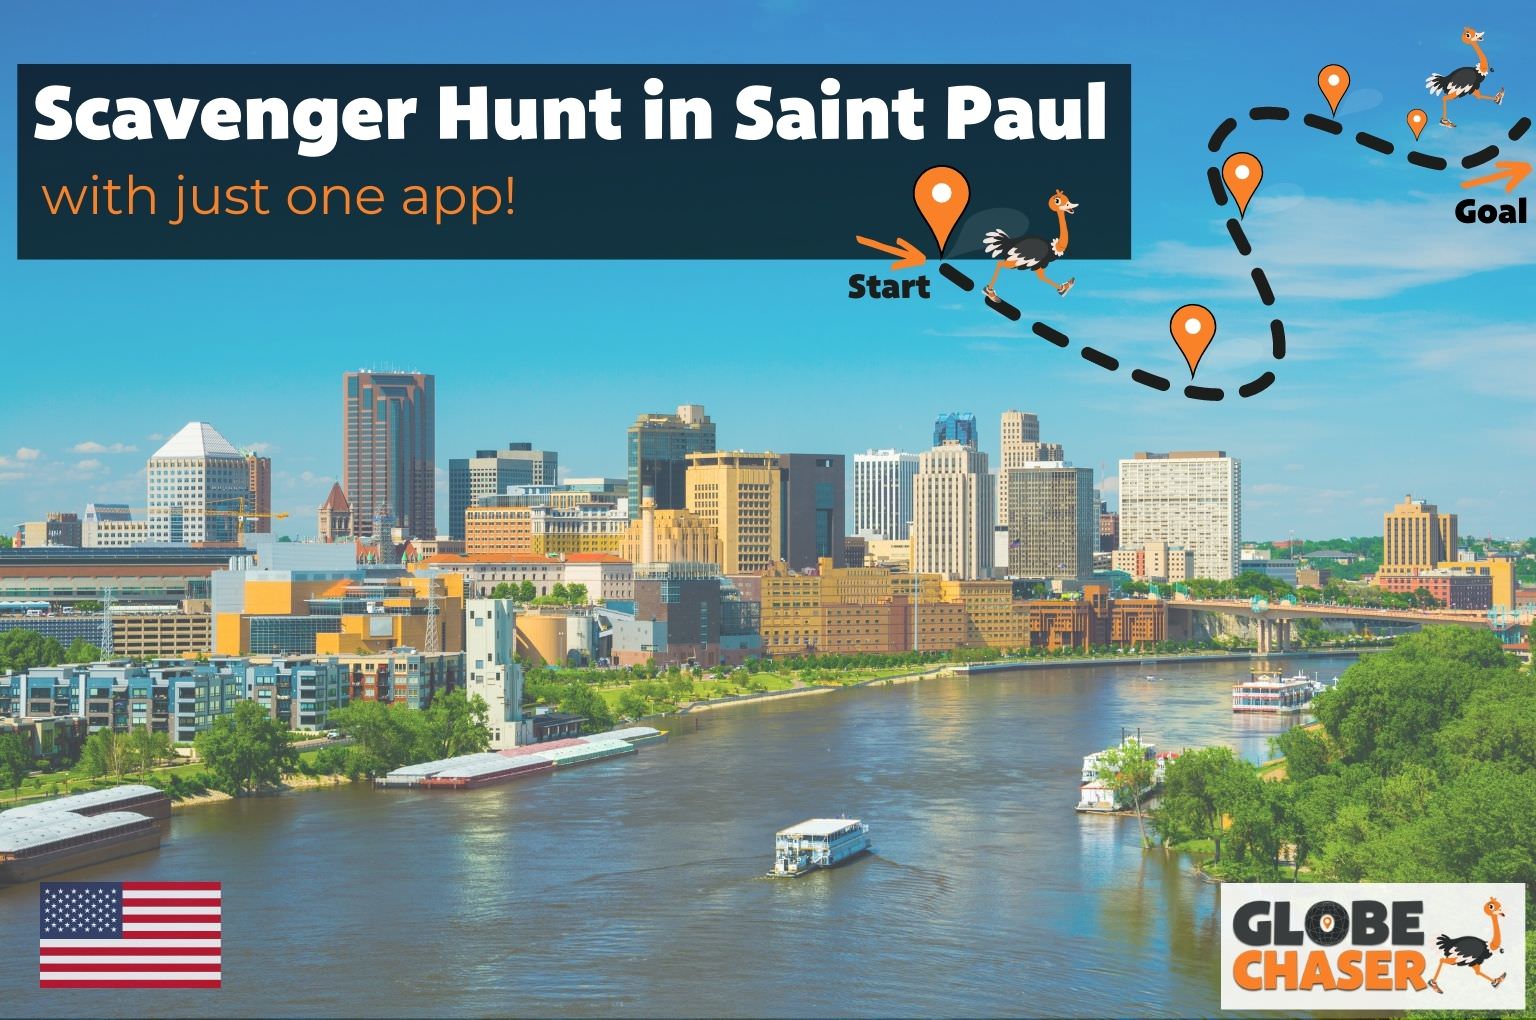 Scavenger Hunt in Saint Paul, USA - Family Activities with the Globe Chaser App for Outdoor Fun